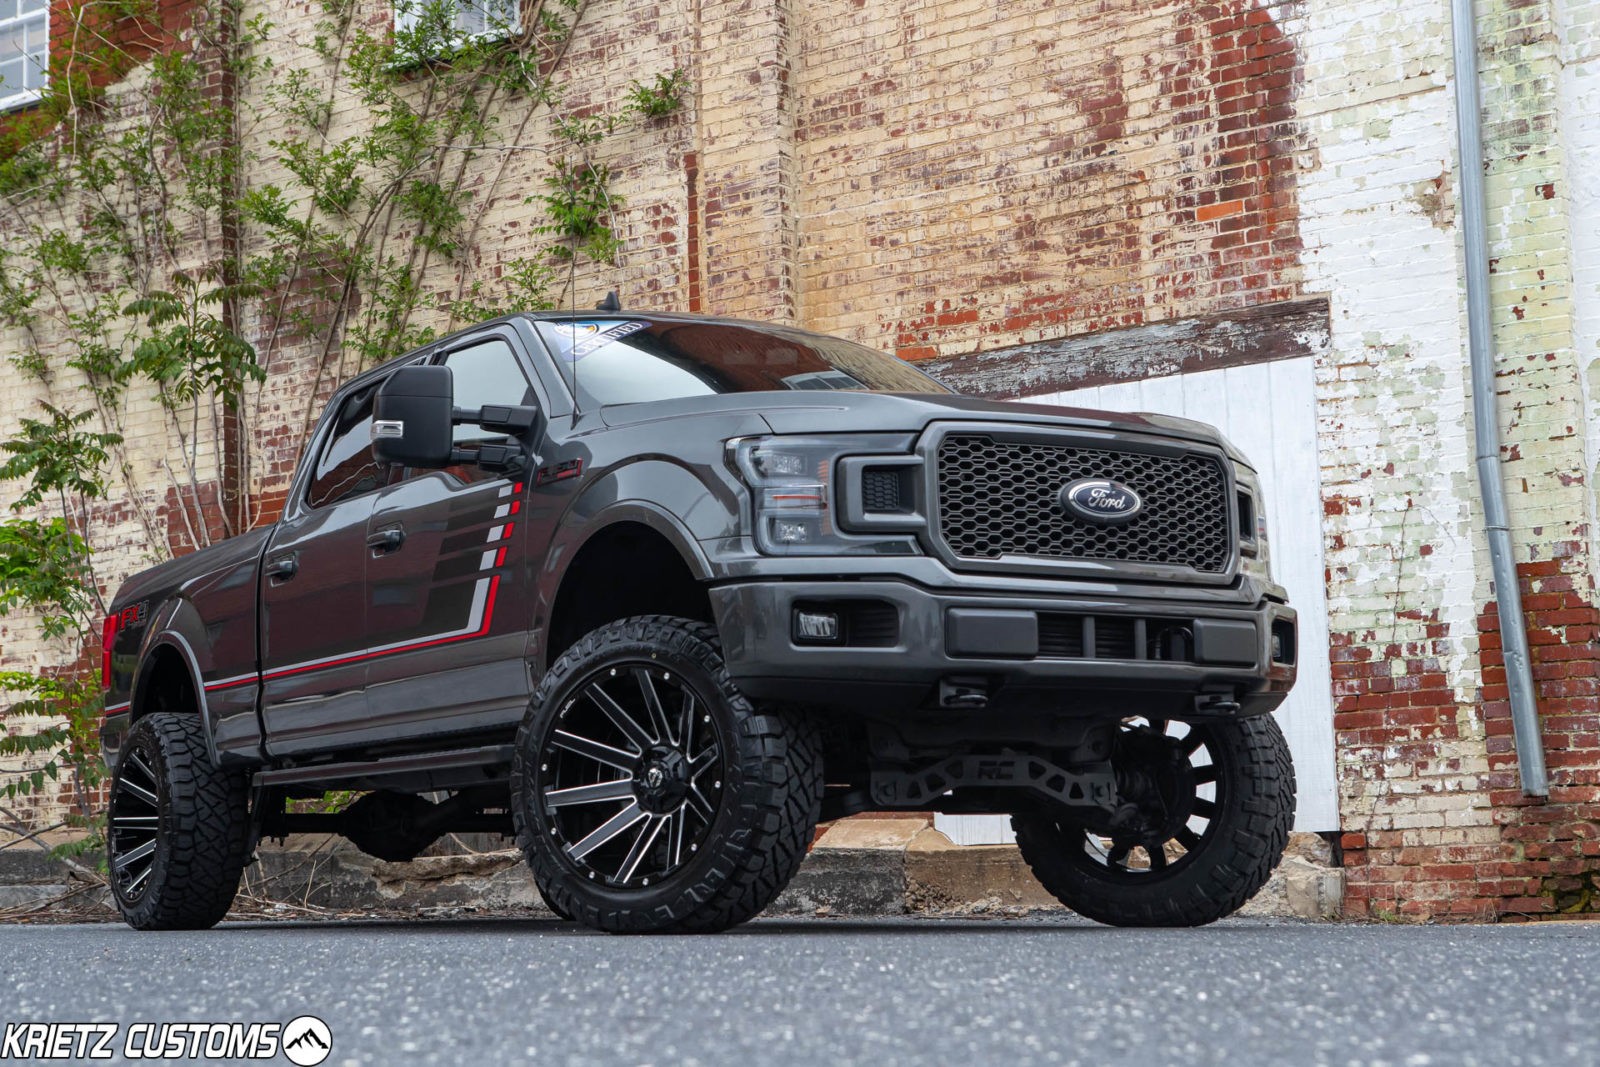 Lifted 2019 Ford F 150 With 6 Inch Rough Country Lift Kit And 22×12 Fuel Contra Wheels Krietz Auto